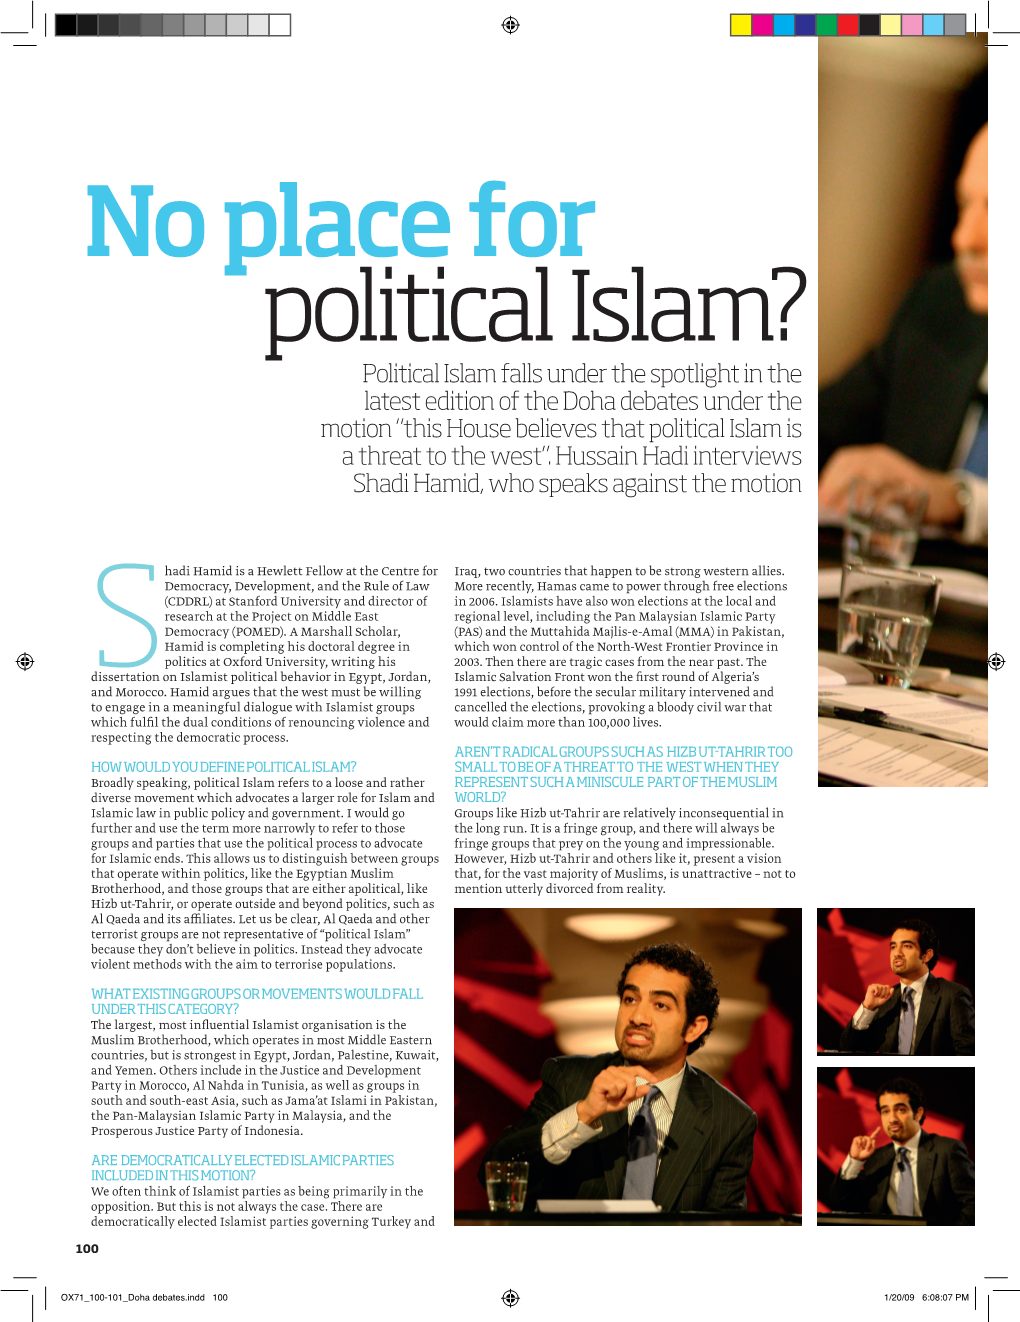 No Place for Political Islam?